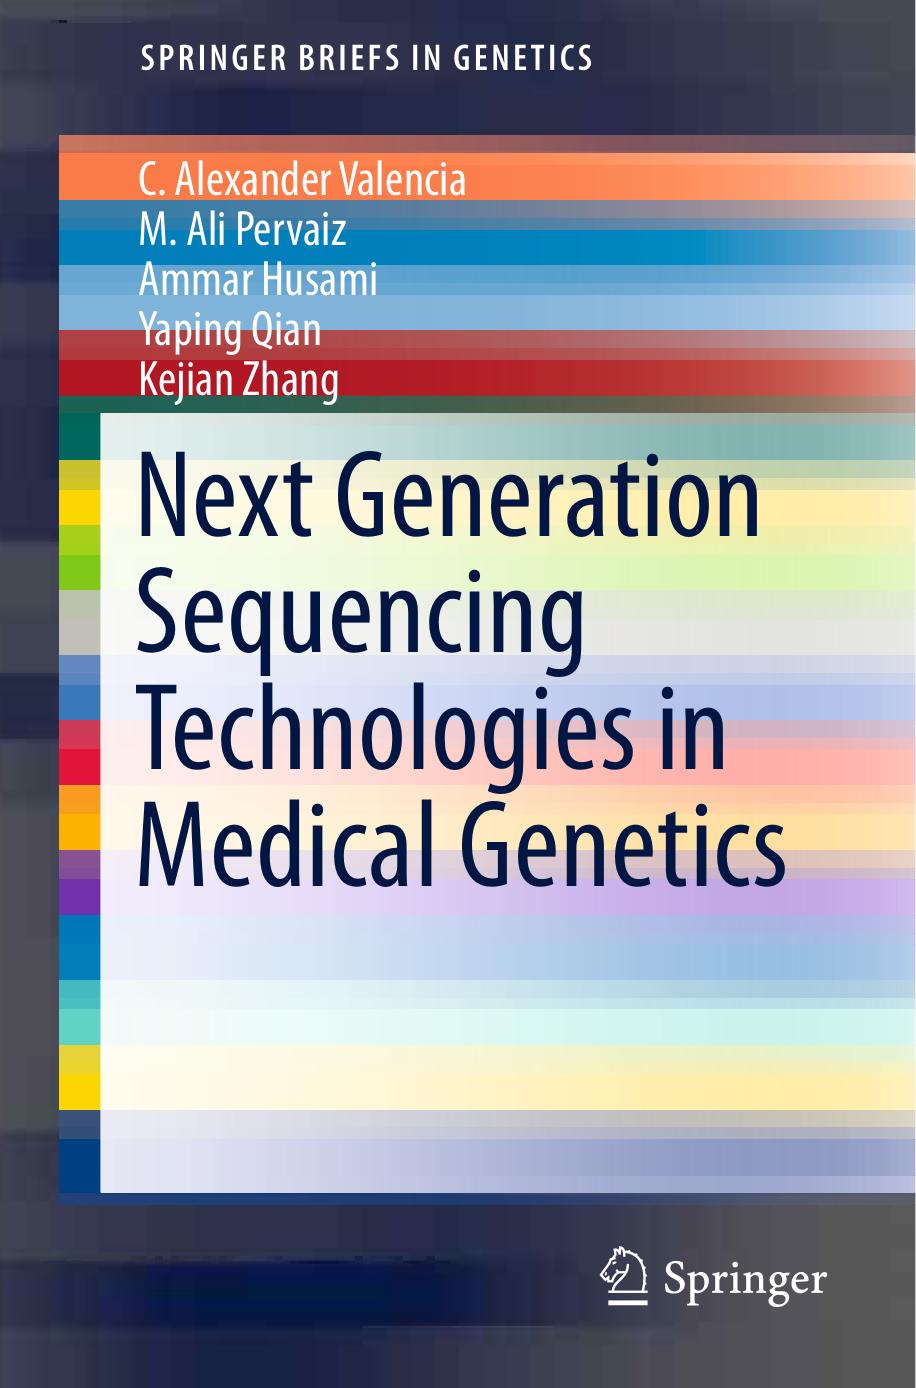 Next Generation Sequencing Technologies in Medical Genetics 2013.pdf